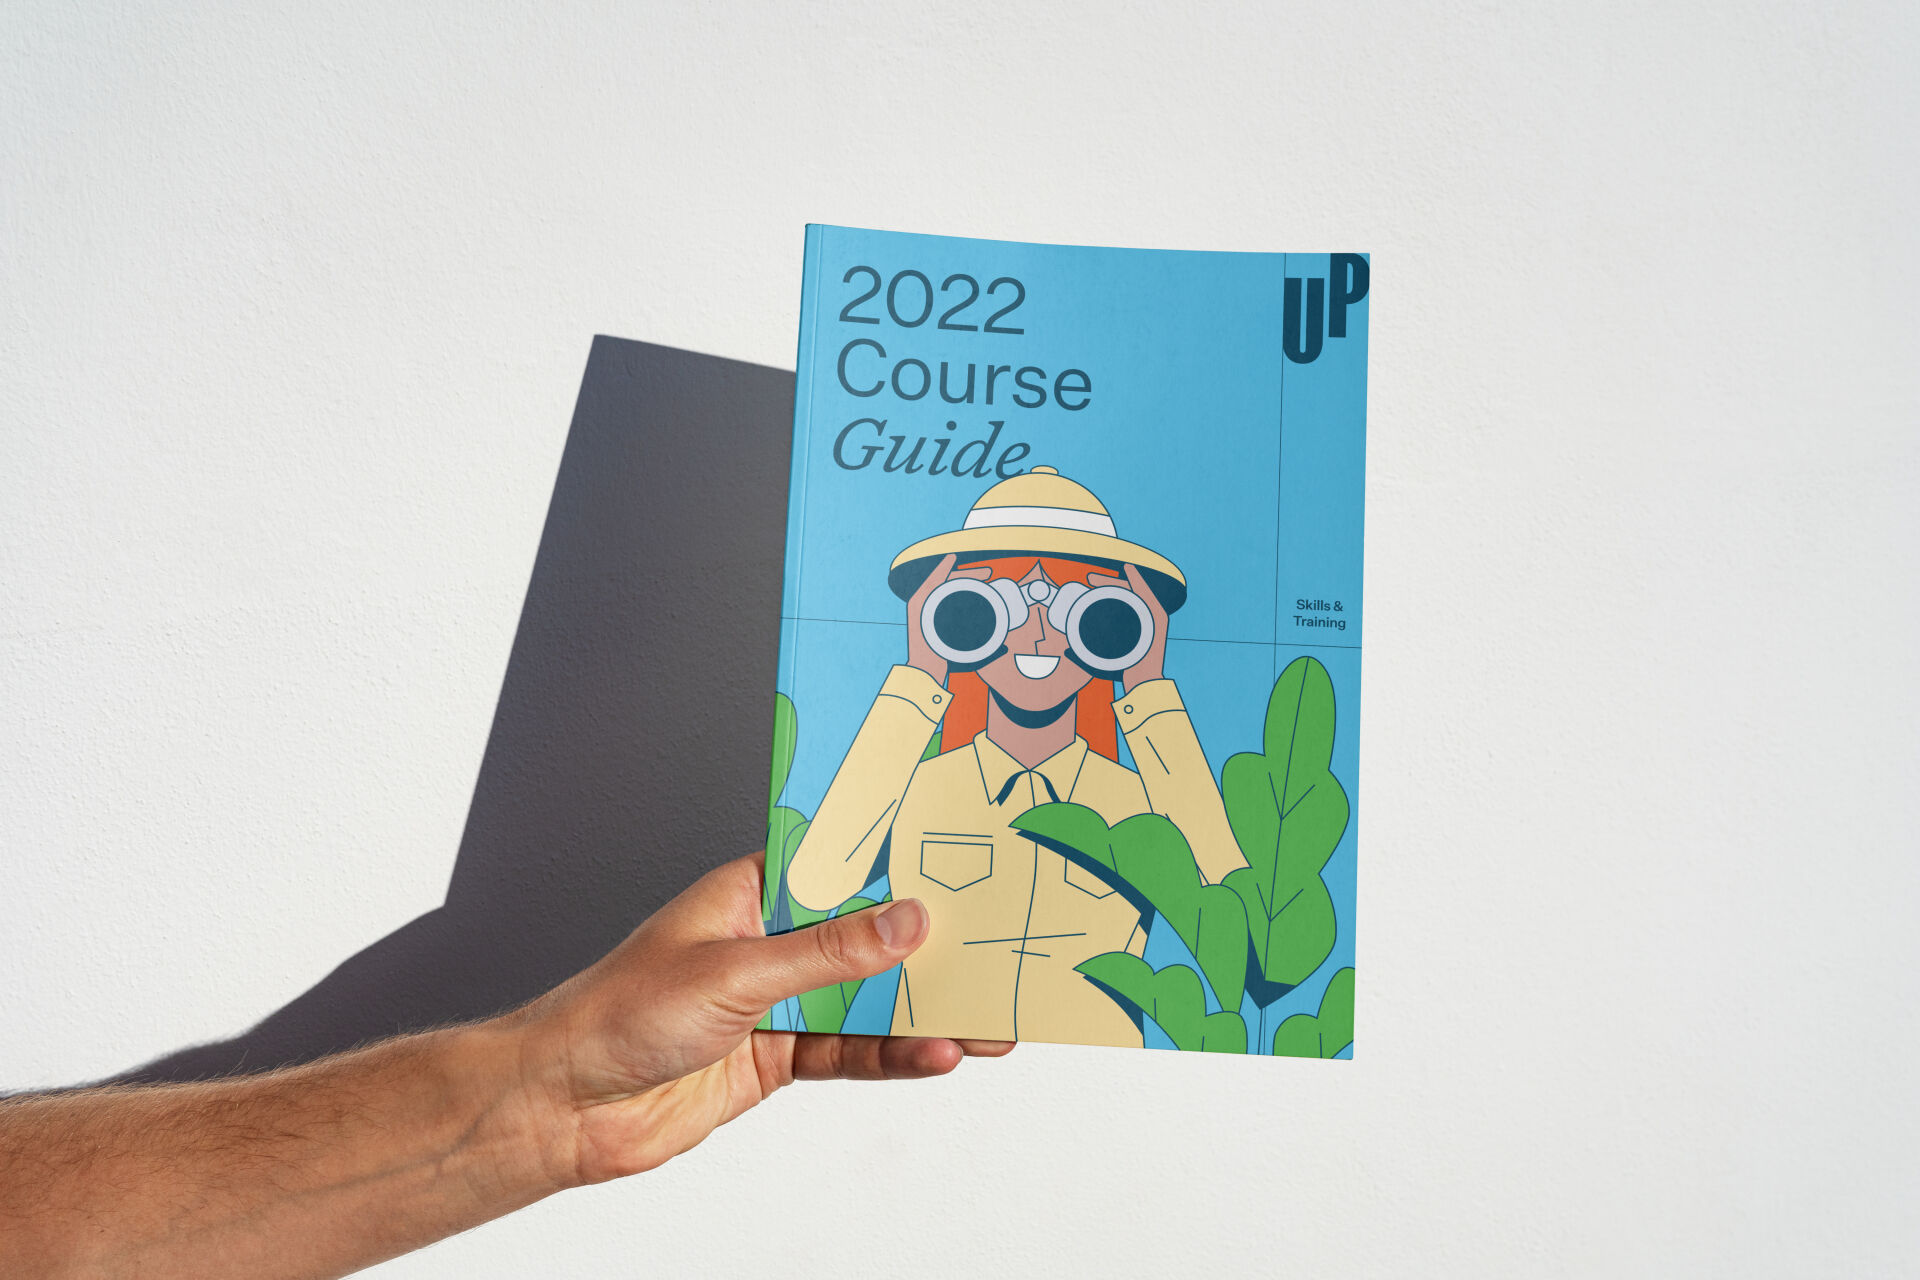 Custom illustration on the cover of the Up course guide